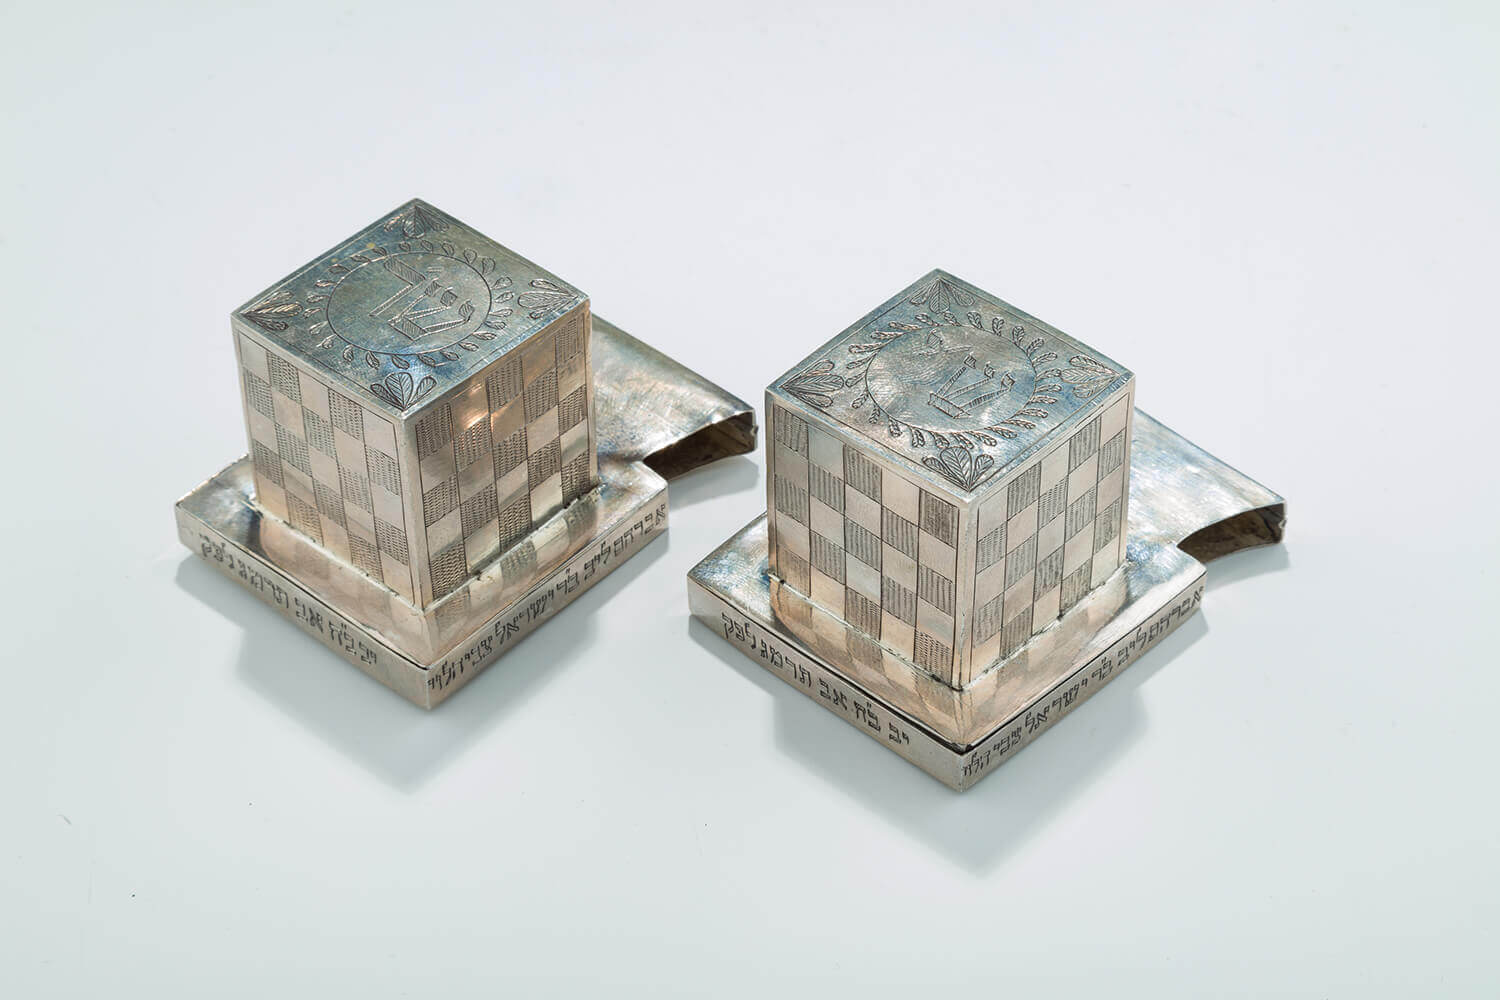 086. A RARE AND IMPORTANT PAIR OF SILVER TEFILLIN CASES OF LITHUANIAN INTEREST